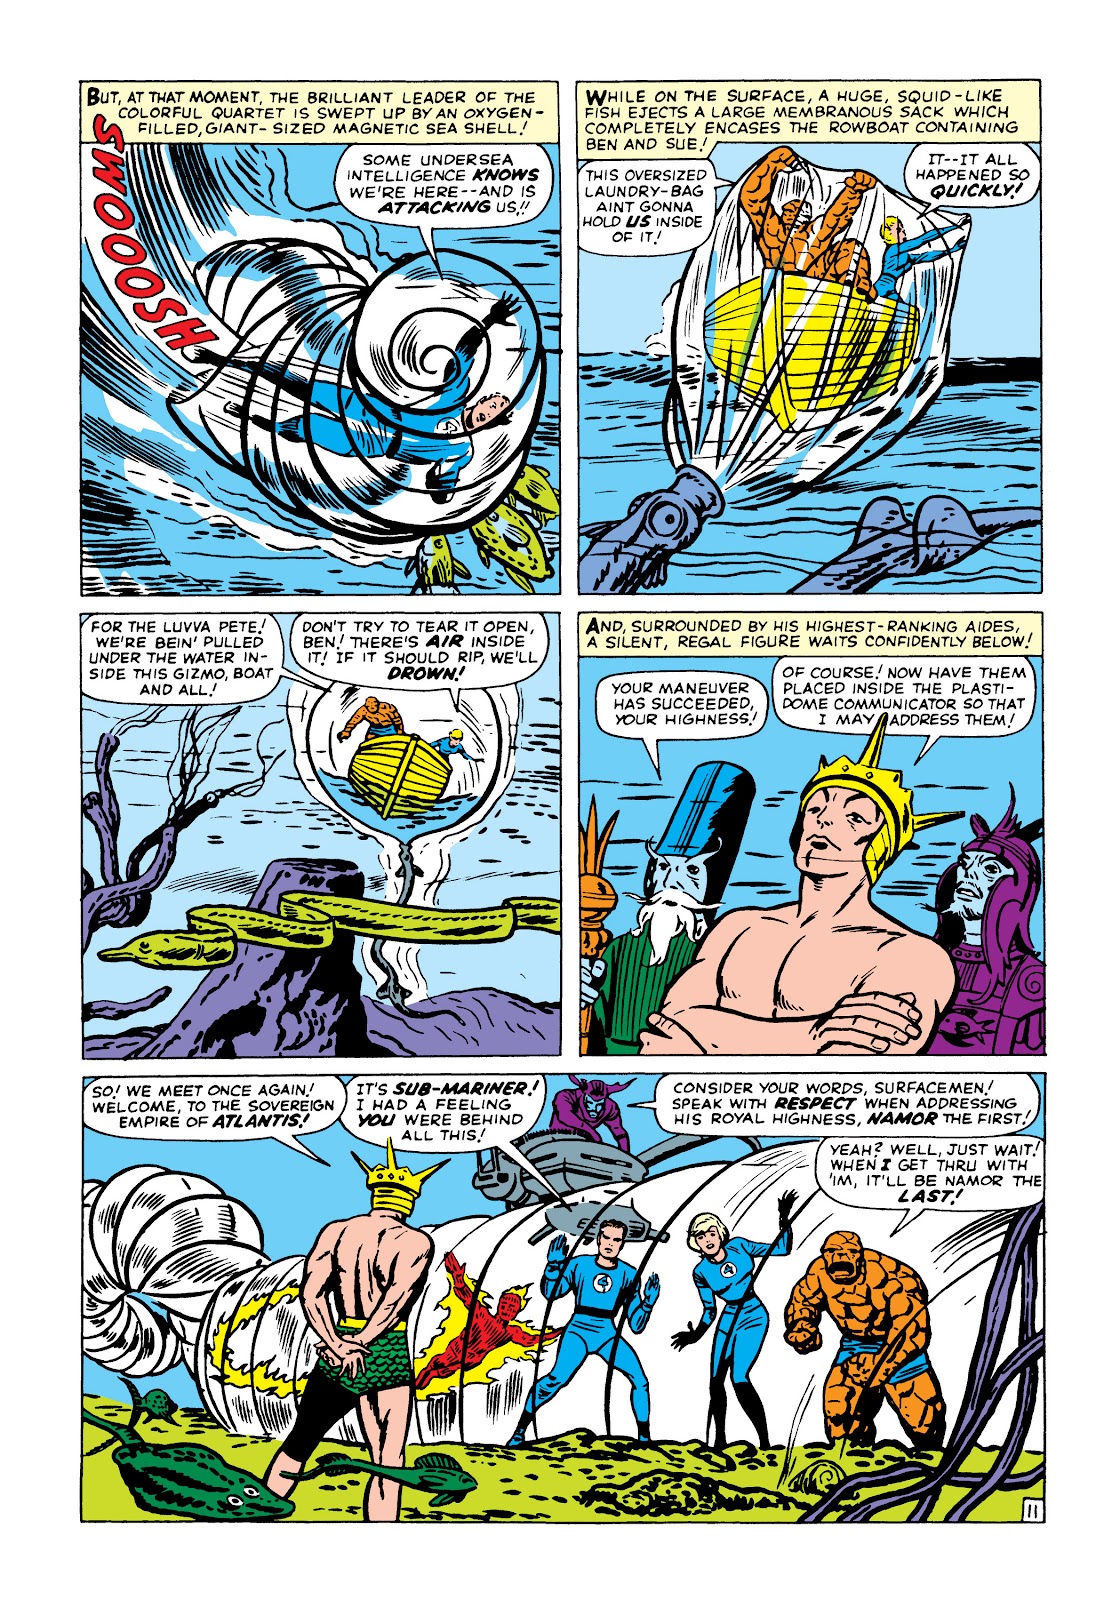 Read online Marvel Masterworks: The Fantastic Four comic - Issue # TPB 2 (Part 3) - 2